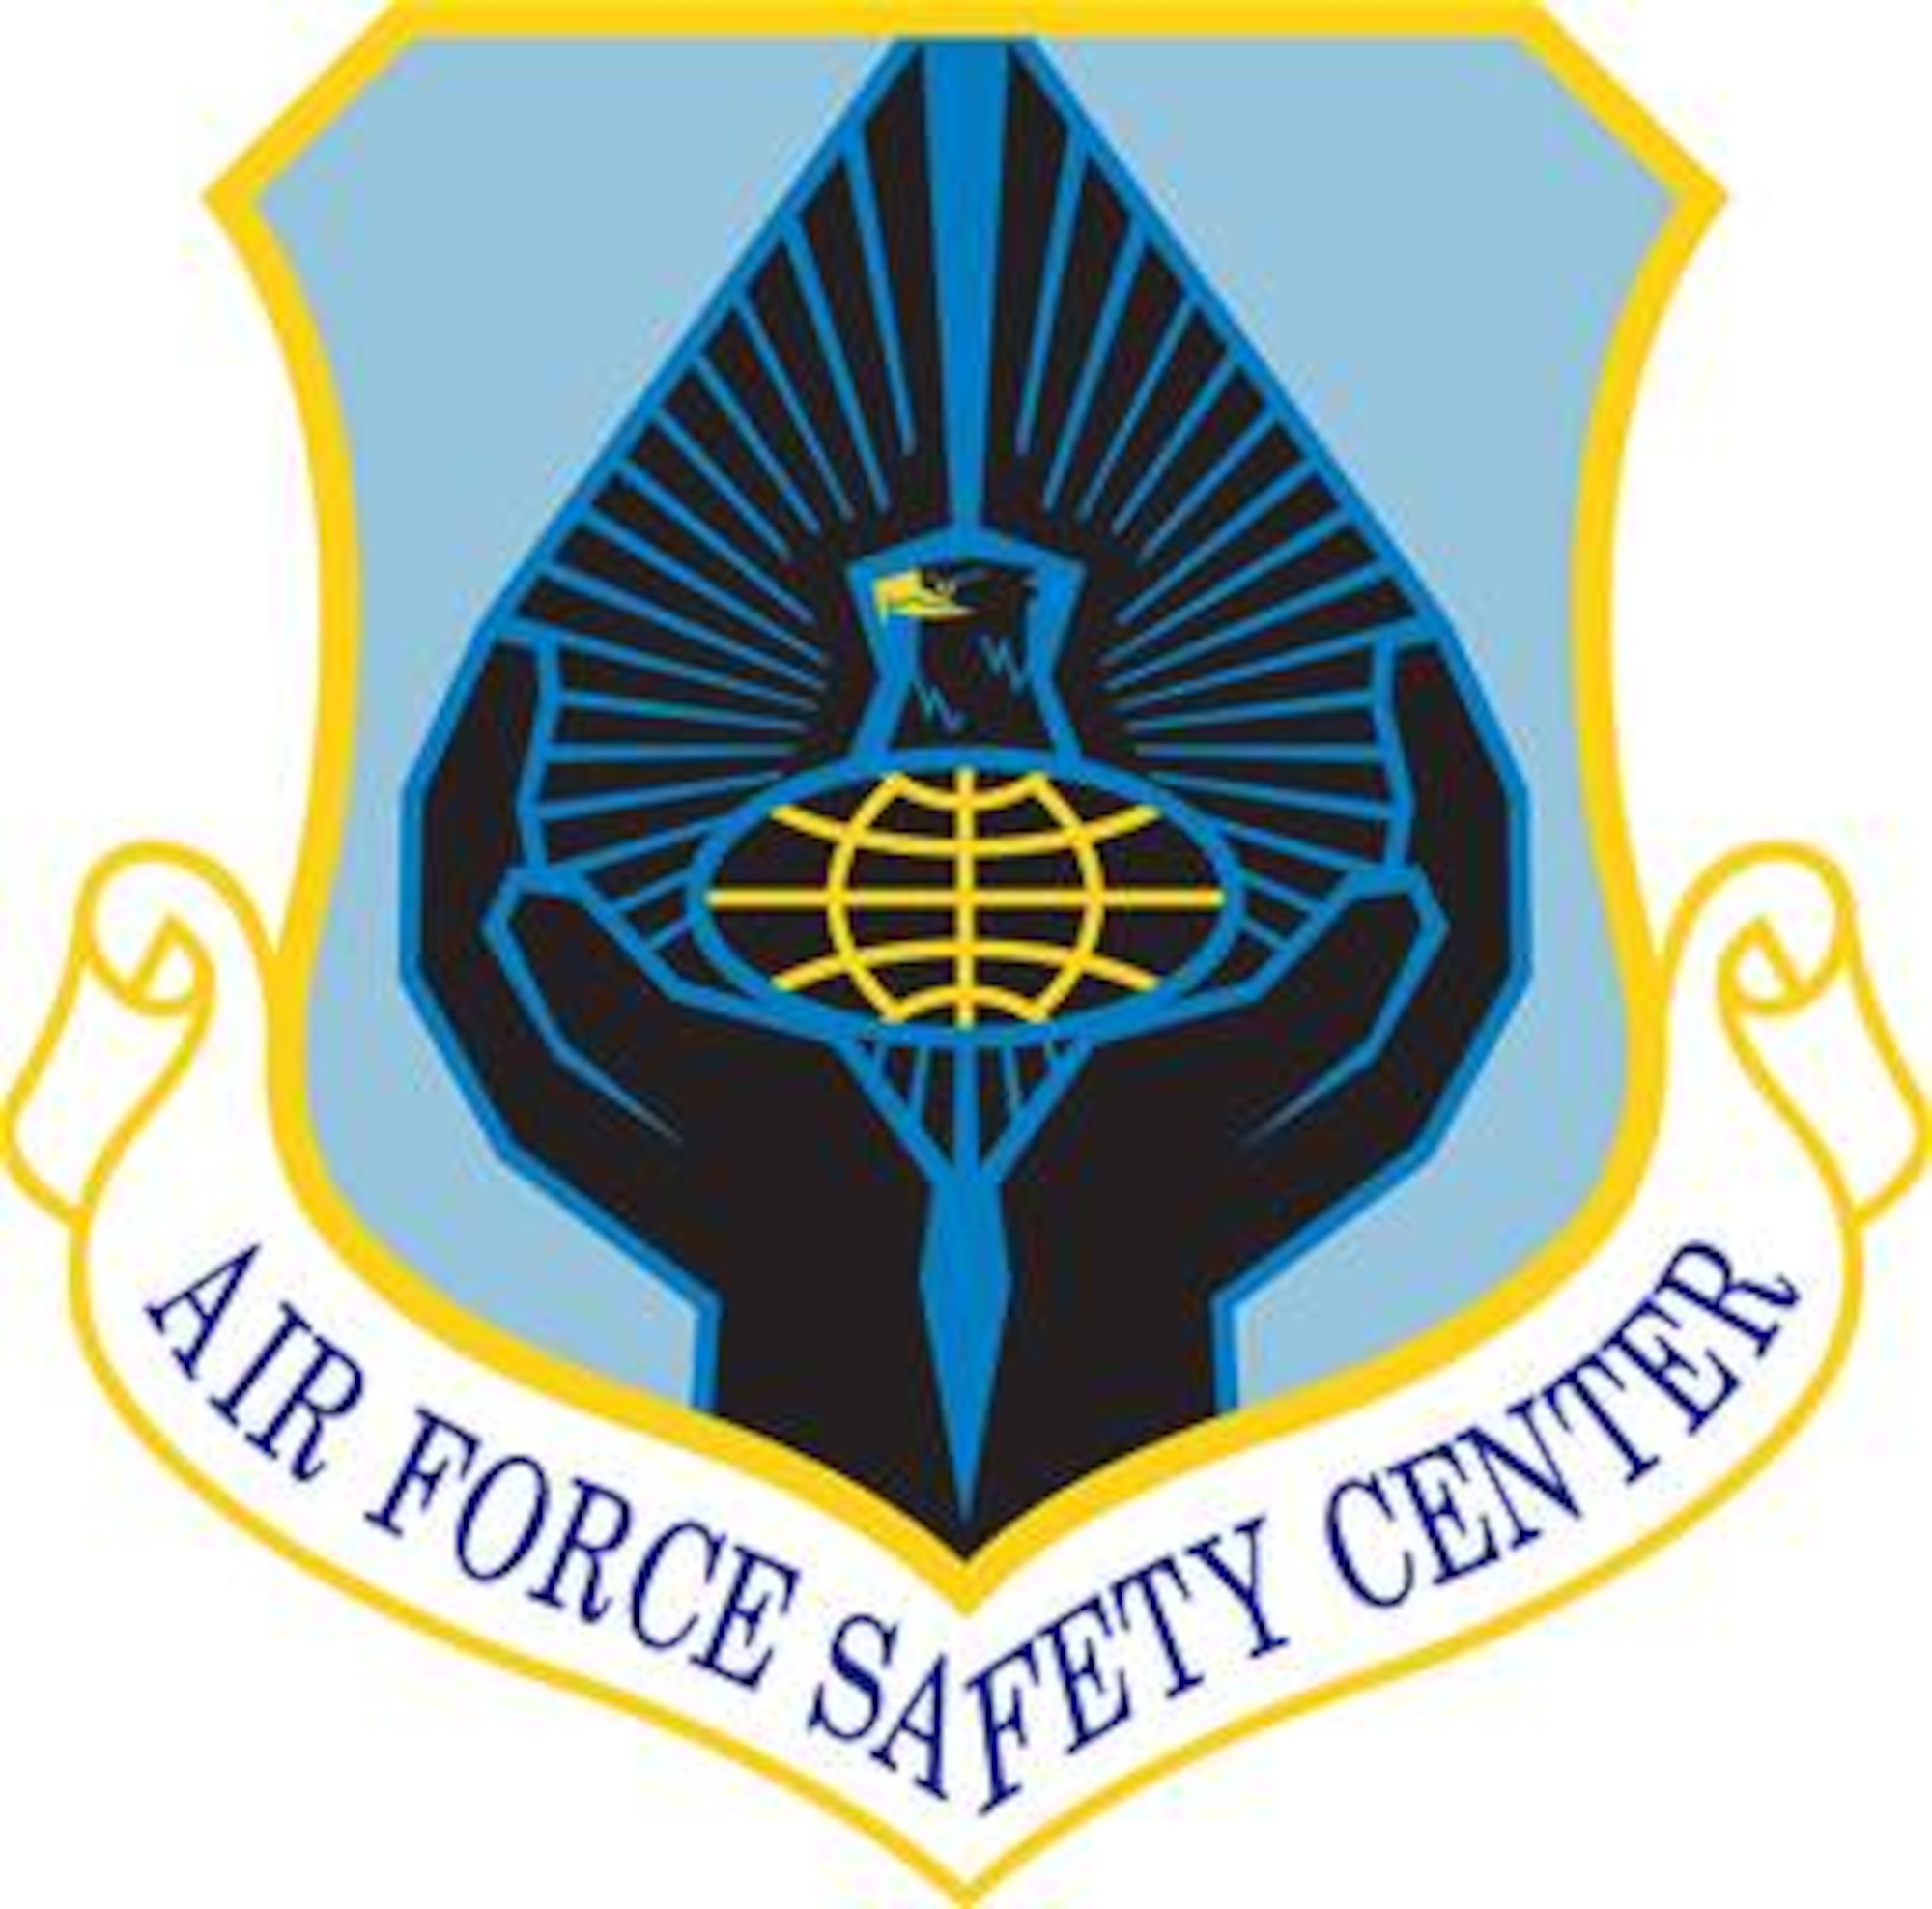 Air Force Safety Center (AFSC), shield (color), U.S. Air Force graphic.  In accordance with Chapter 3 of AFI 84-105, commercial reproduction of this emblem is NOT permitted without the permission of the proponent organizational/unit commander. 
